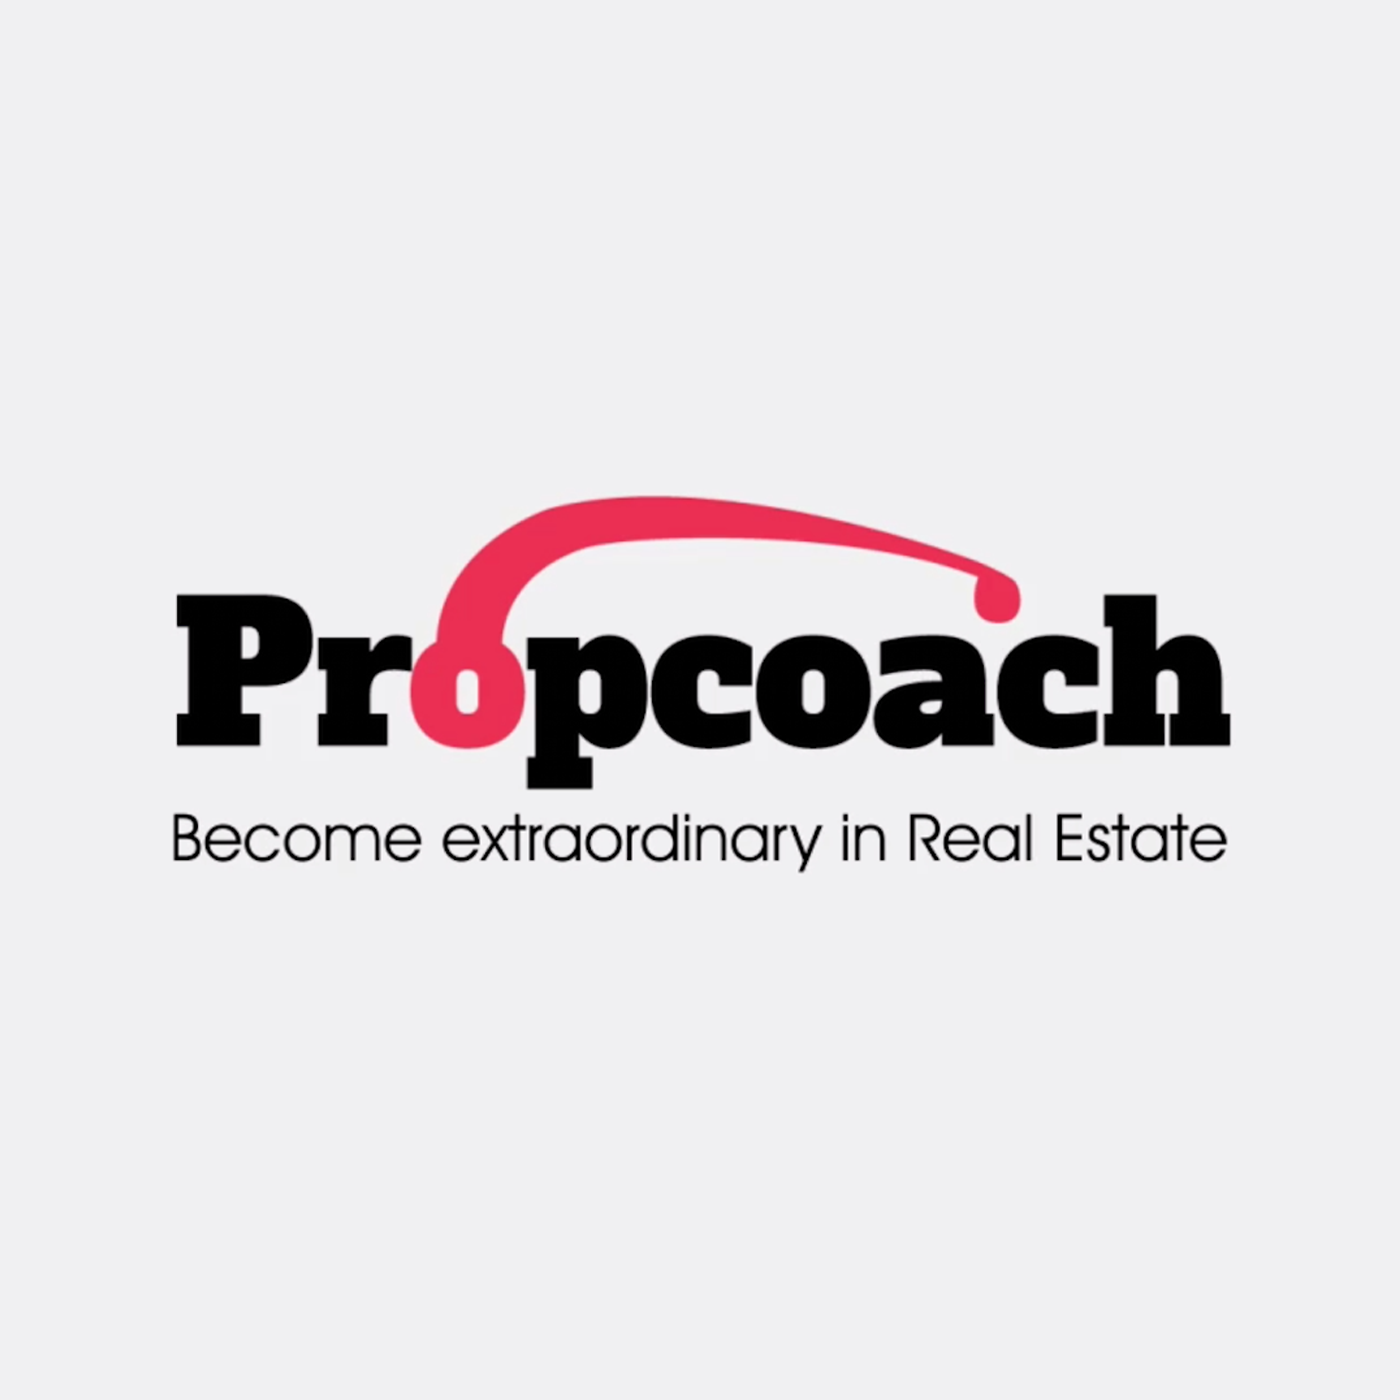 Propcoach Podcast #0005 - How to Start your Marketing Journey